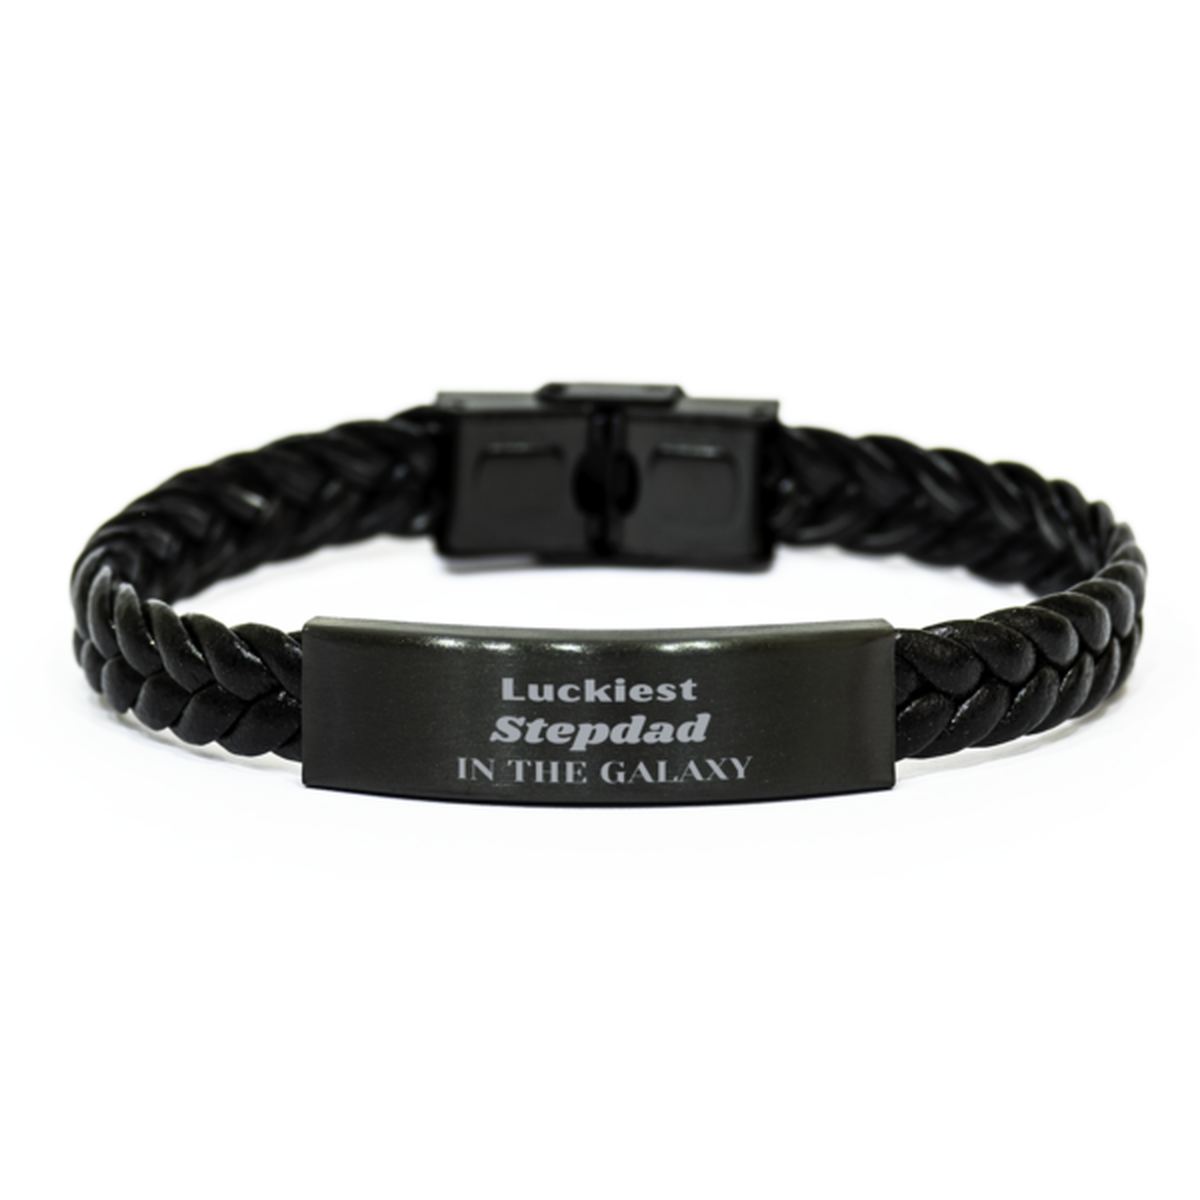 Luckiest Stepdad in the Galaxy, To My Stepdad Engraved Gifts, Christmas Stepdad Braided Leather Bracelet Gifts, X-mas Birthday Unique Gifts For Stepdad Men Women